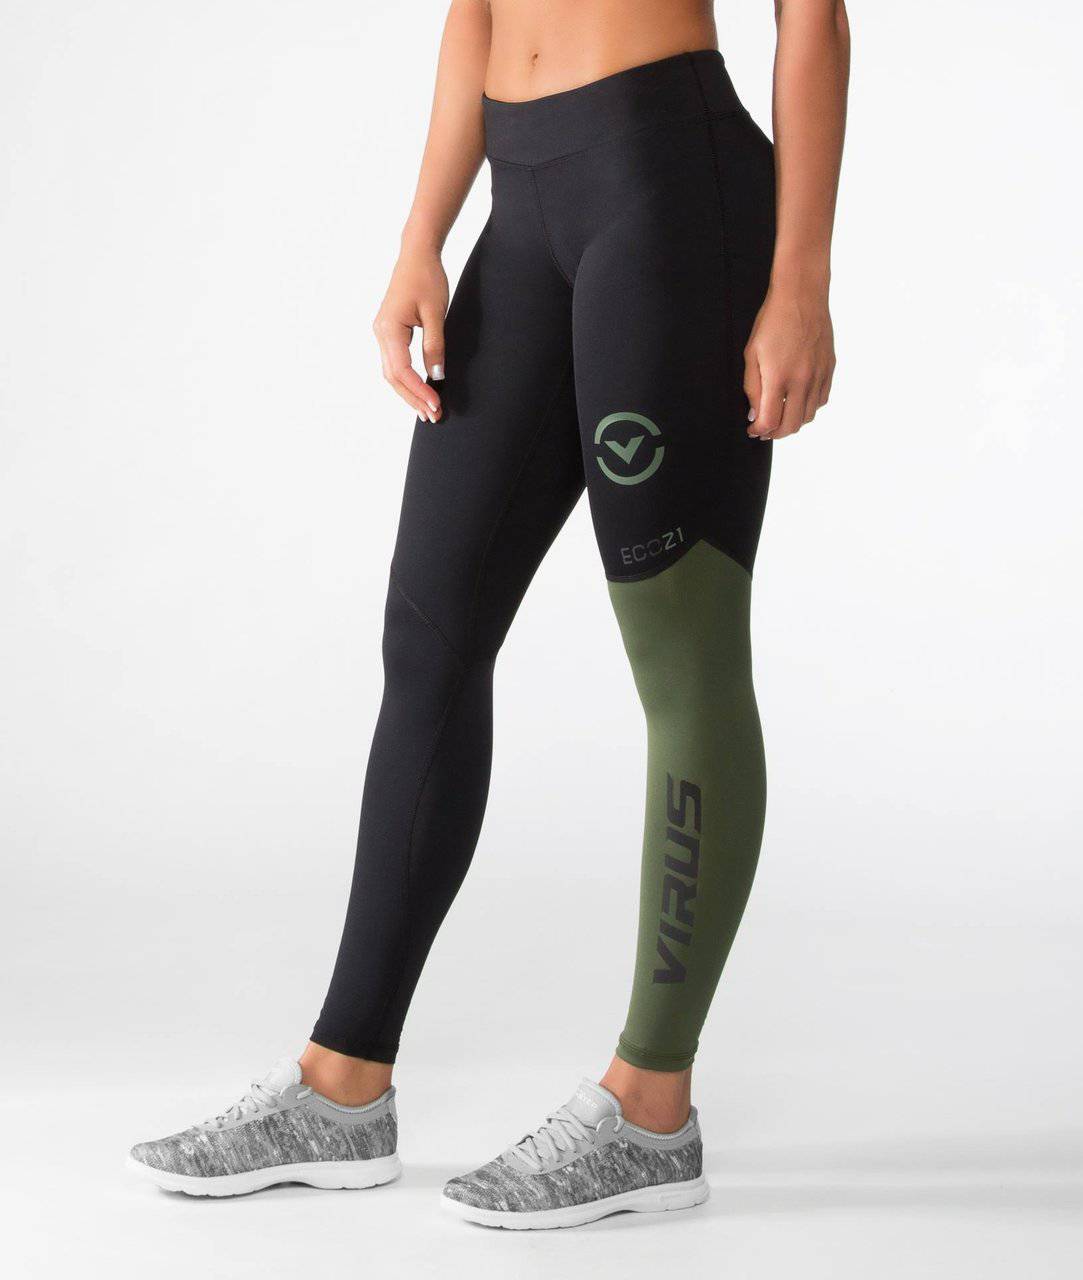 New Shorts and Compression Gear from Virus Intl - Delta Grade